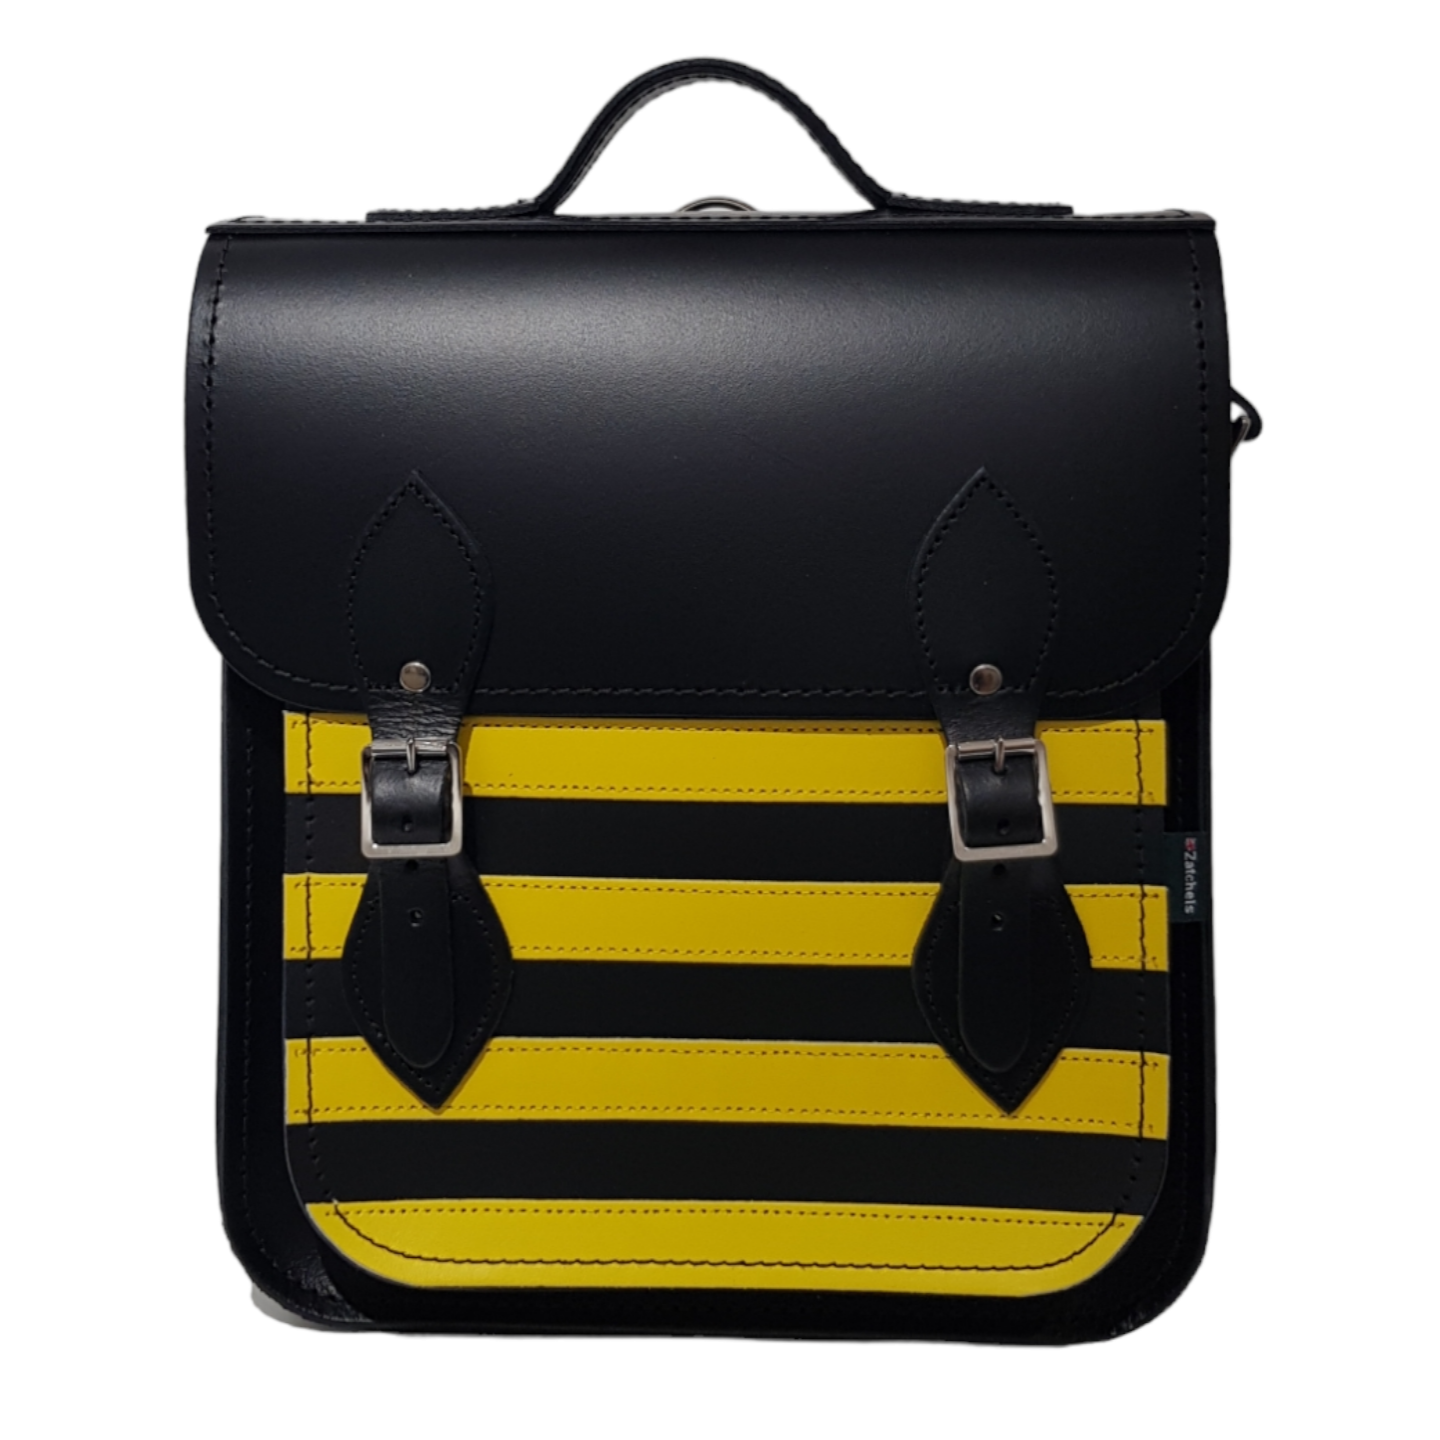 Handmade Leather City Backpack - Gothic Striped Yellow & Black - Small